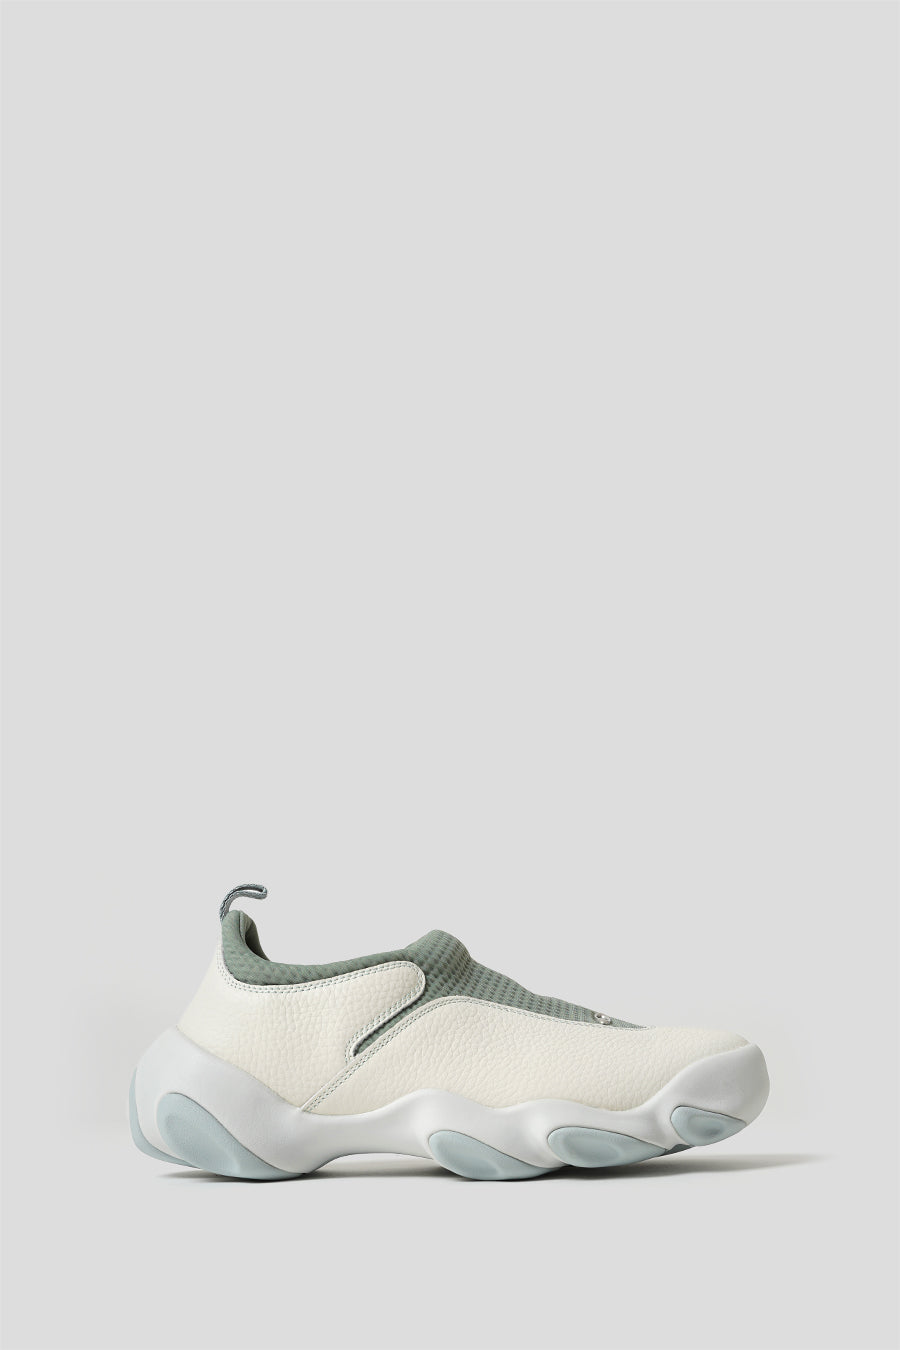 Oakley Factory Team - LILY PAD AND WHITE FLESH LEATHER FACTORY TEAM SNEAKERS - LE LABO STORE